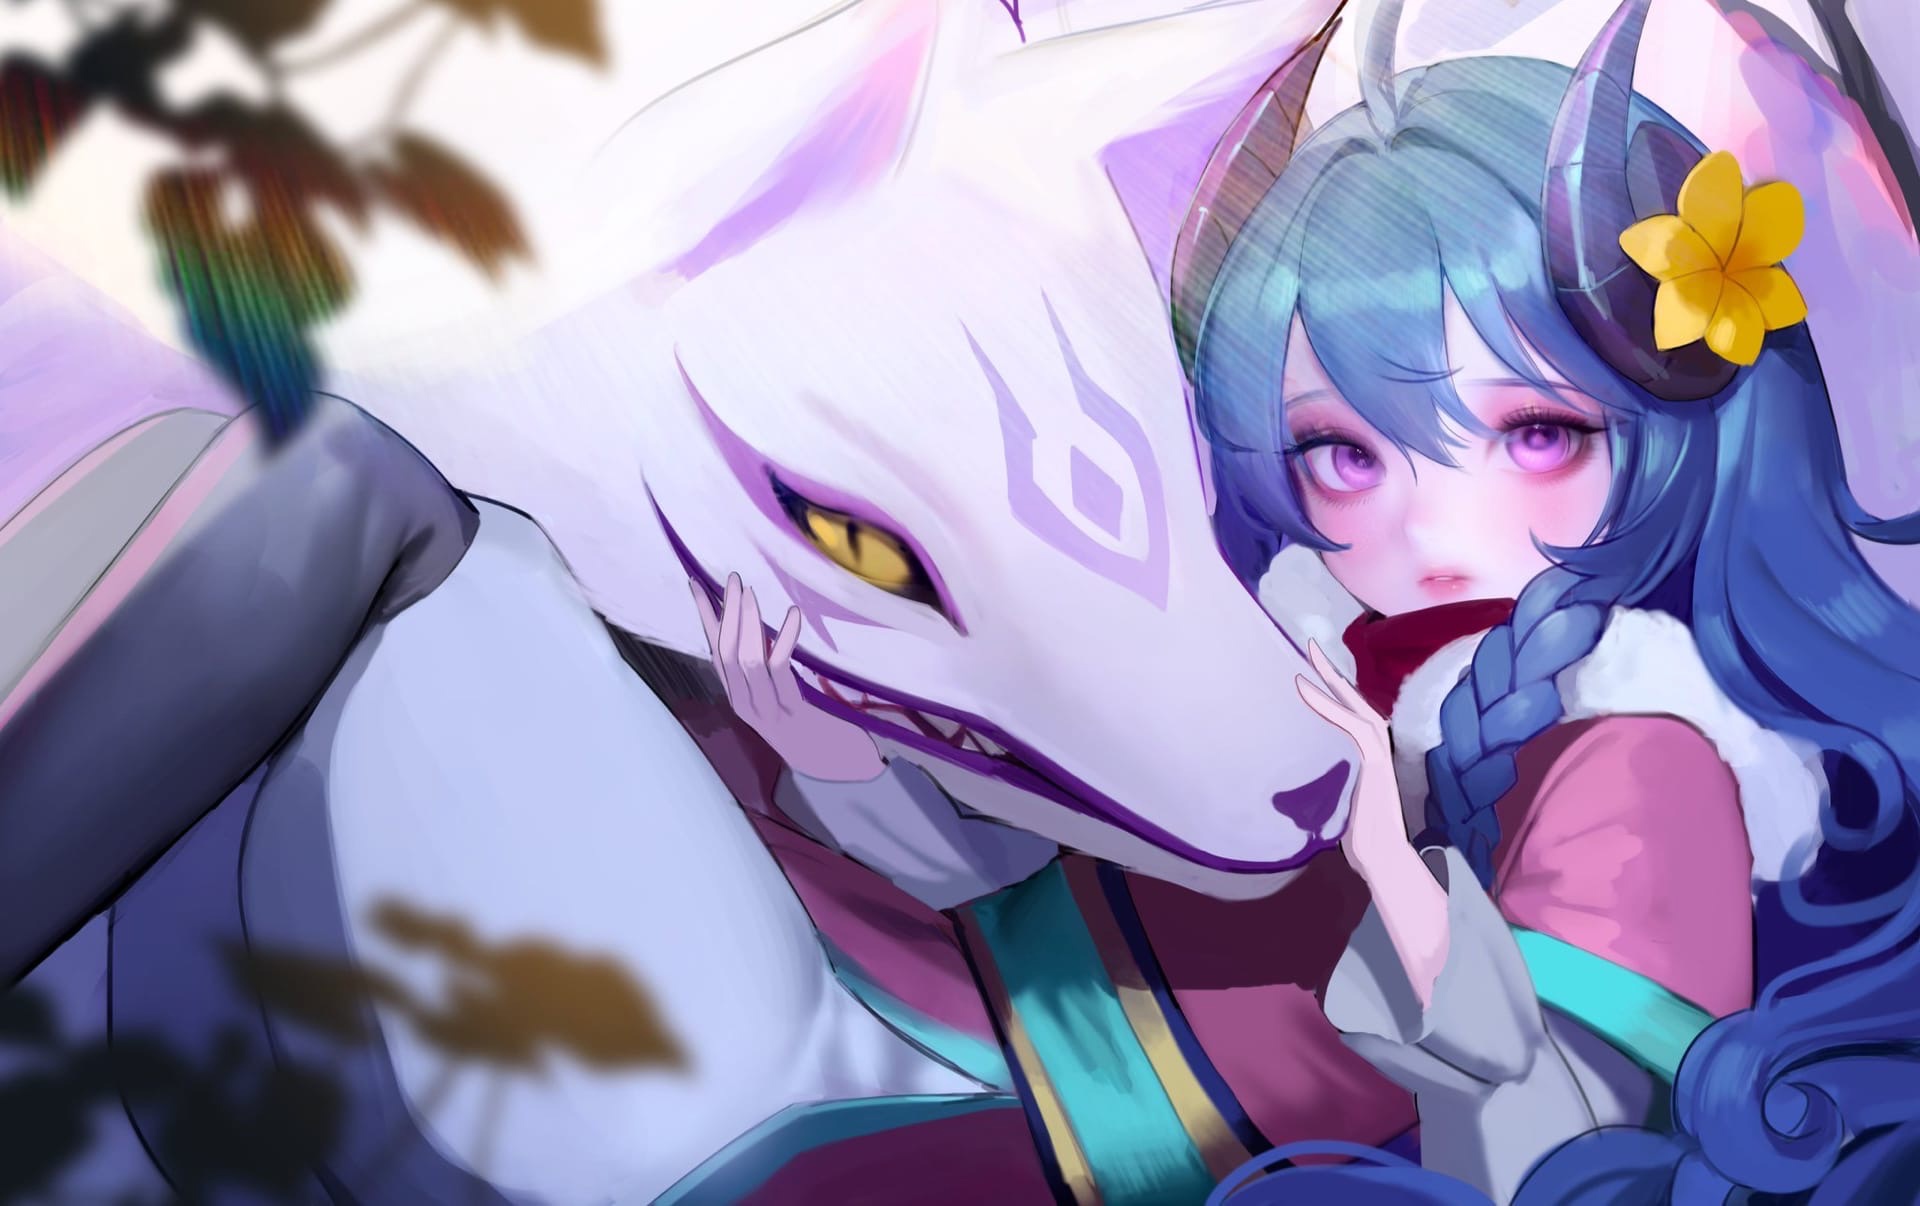 Anime 1920x1206 League of Legends Kindred (League of Legends) PC gaming fan art creature anime anime girls fantasy art fantasy girl blue hair pink eyes video game art video game girls video game characters